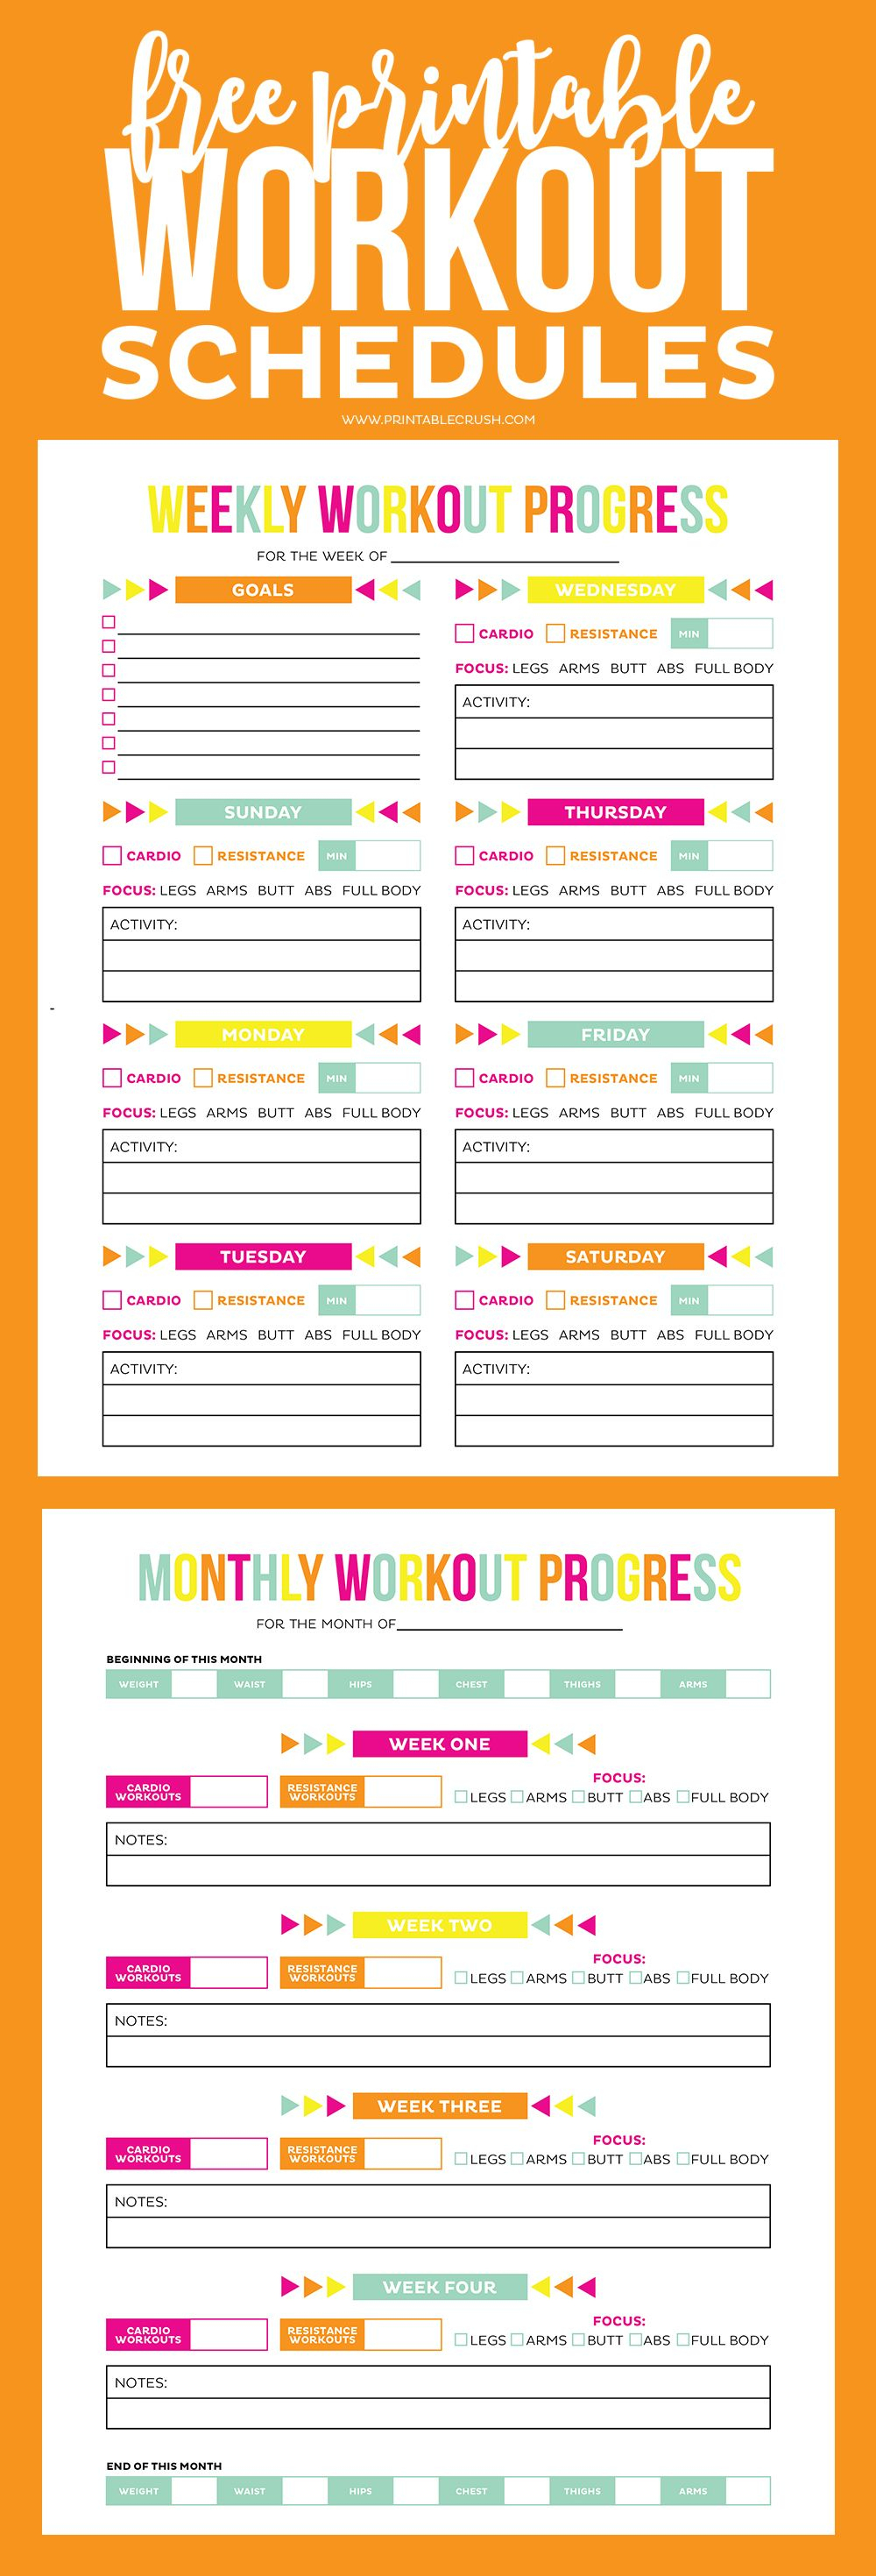 Download This Free Printable Workout Schedule And Progress Sheet To - Free Printable Workout Plans